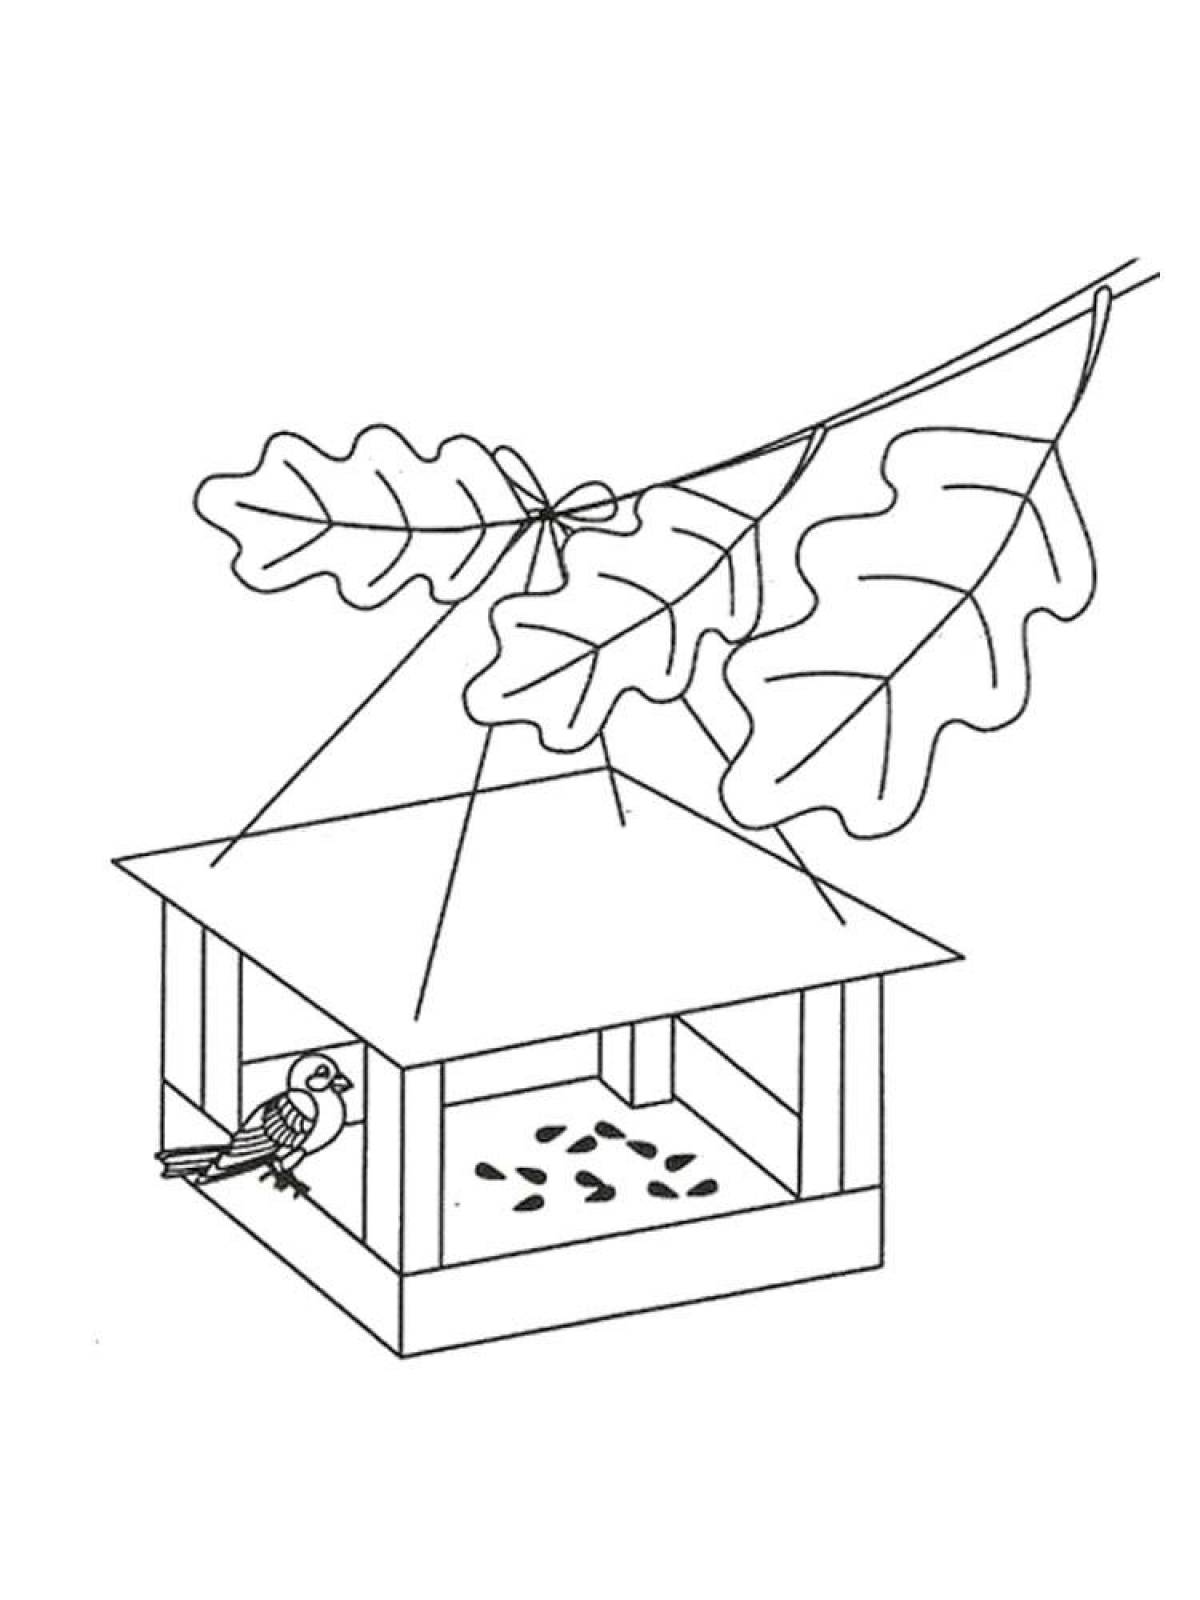 Colorful bird feeder coloring page